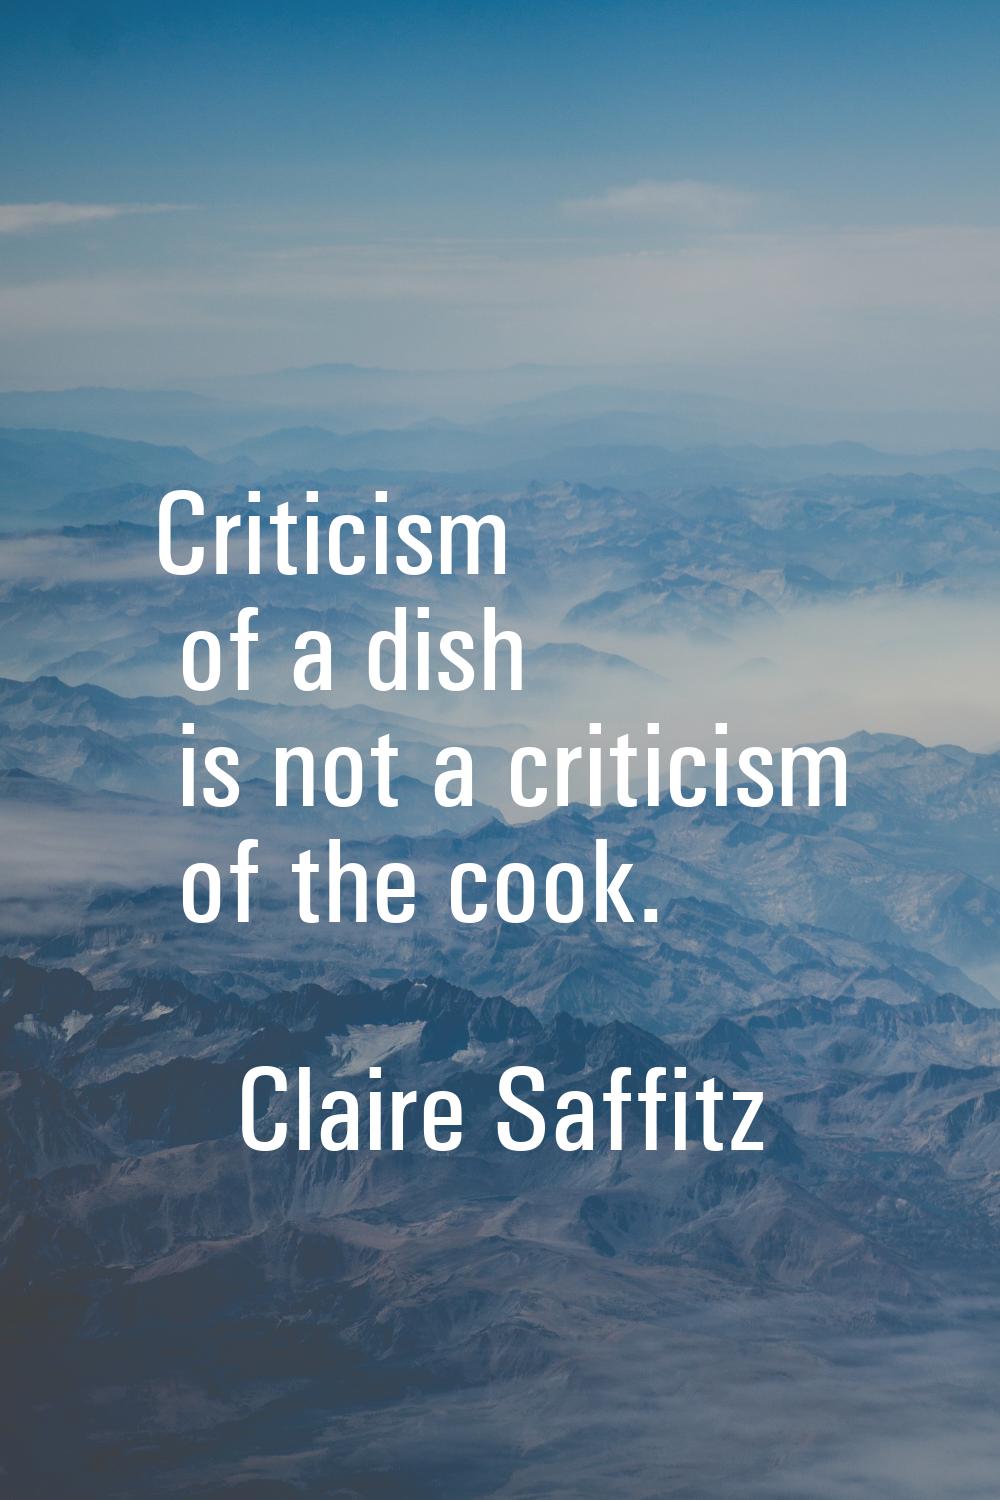 Criticism of a dish is not a criticism of the cook.